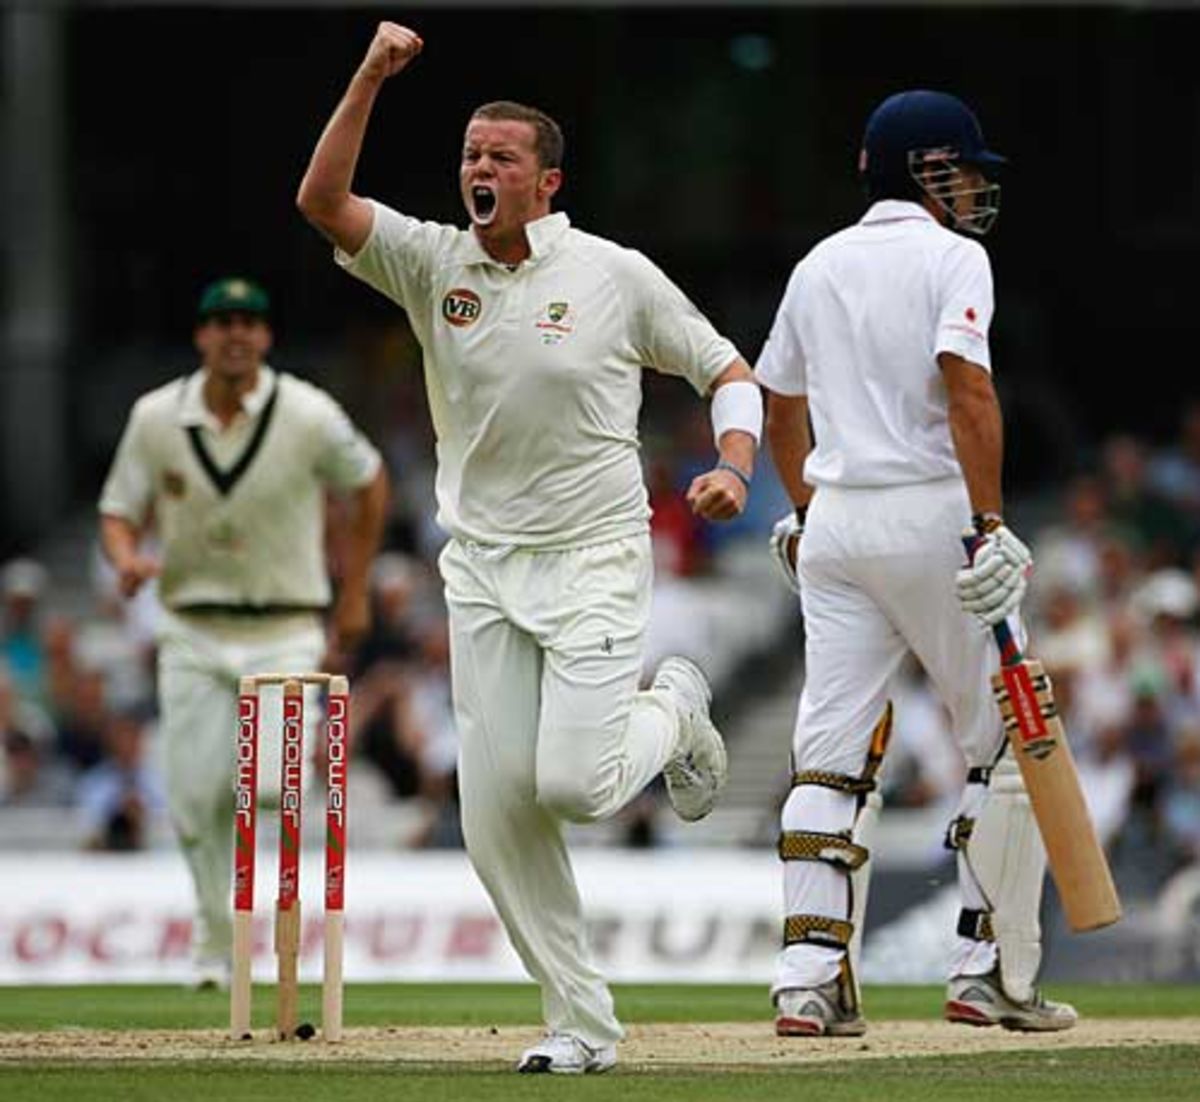 Peter Siddle gave Australia an early breakthrough when he removed Alastair Cook, England v Australia, 5th Test, The Oval, 1st day, August 20, 2009